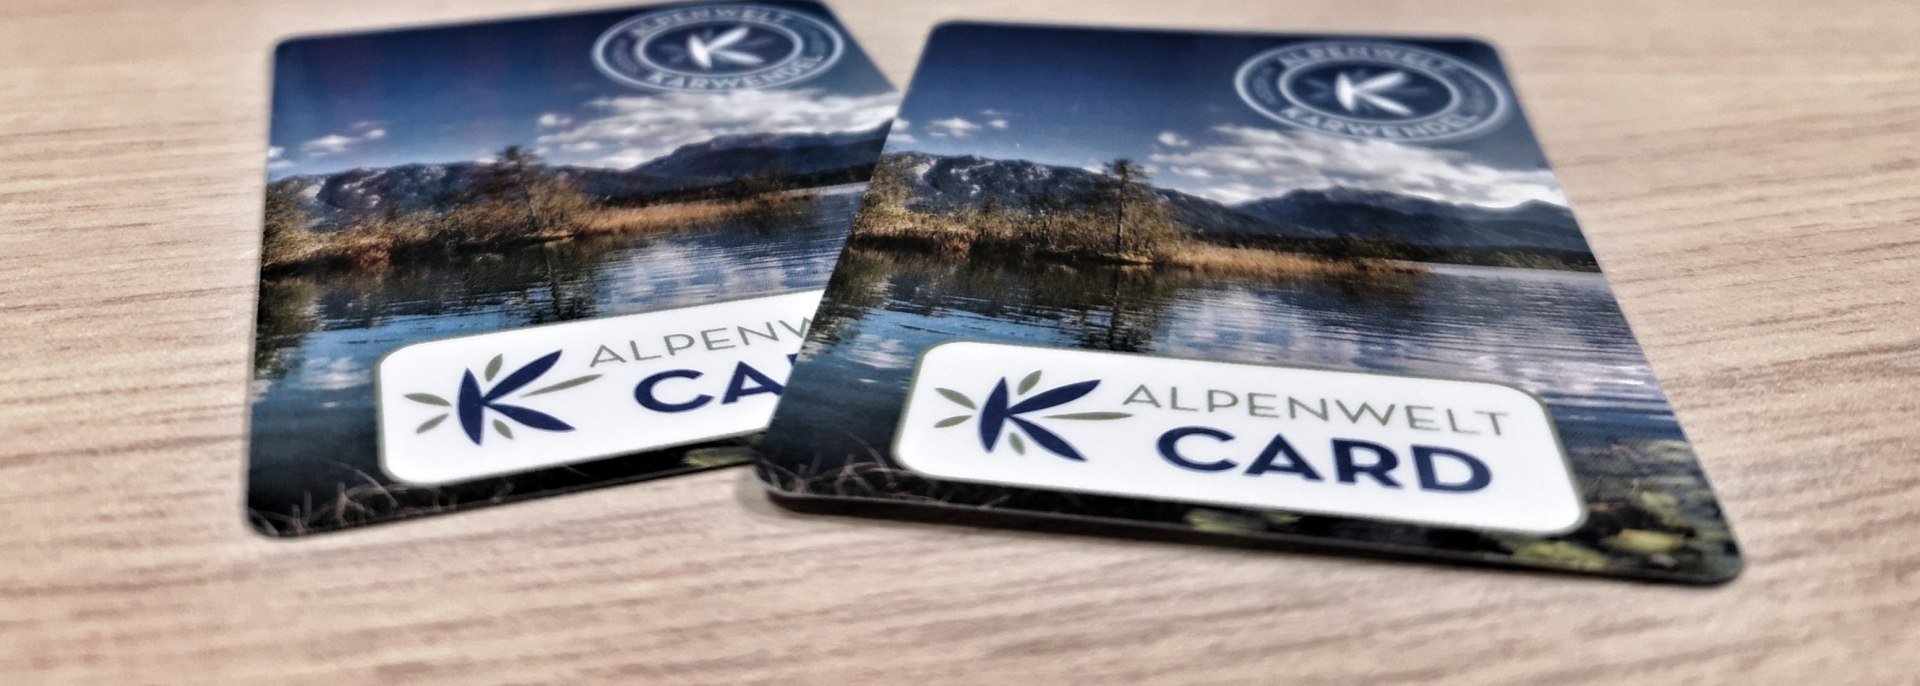 With the AlpenweltCard guest card you get many discounts and free services for your holiday in Bavaria. AlpenweltCard - , © Andreas Karner